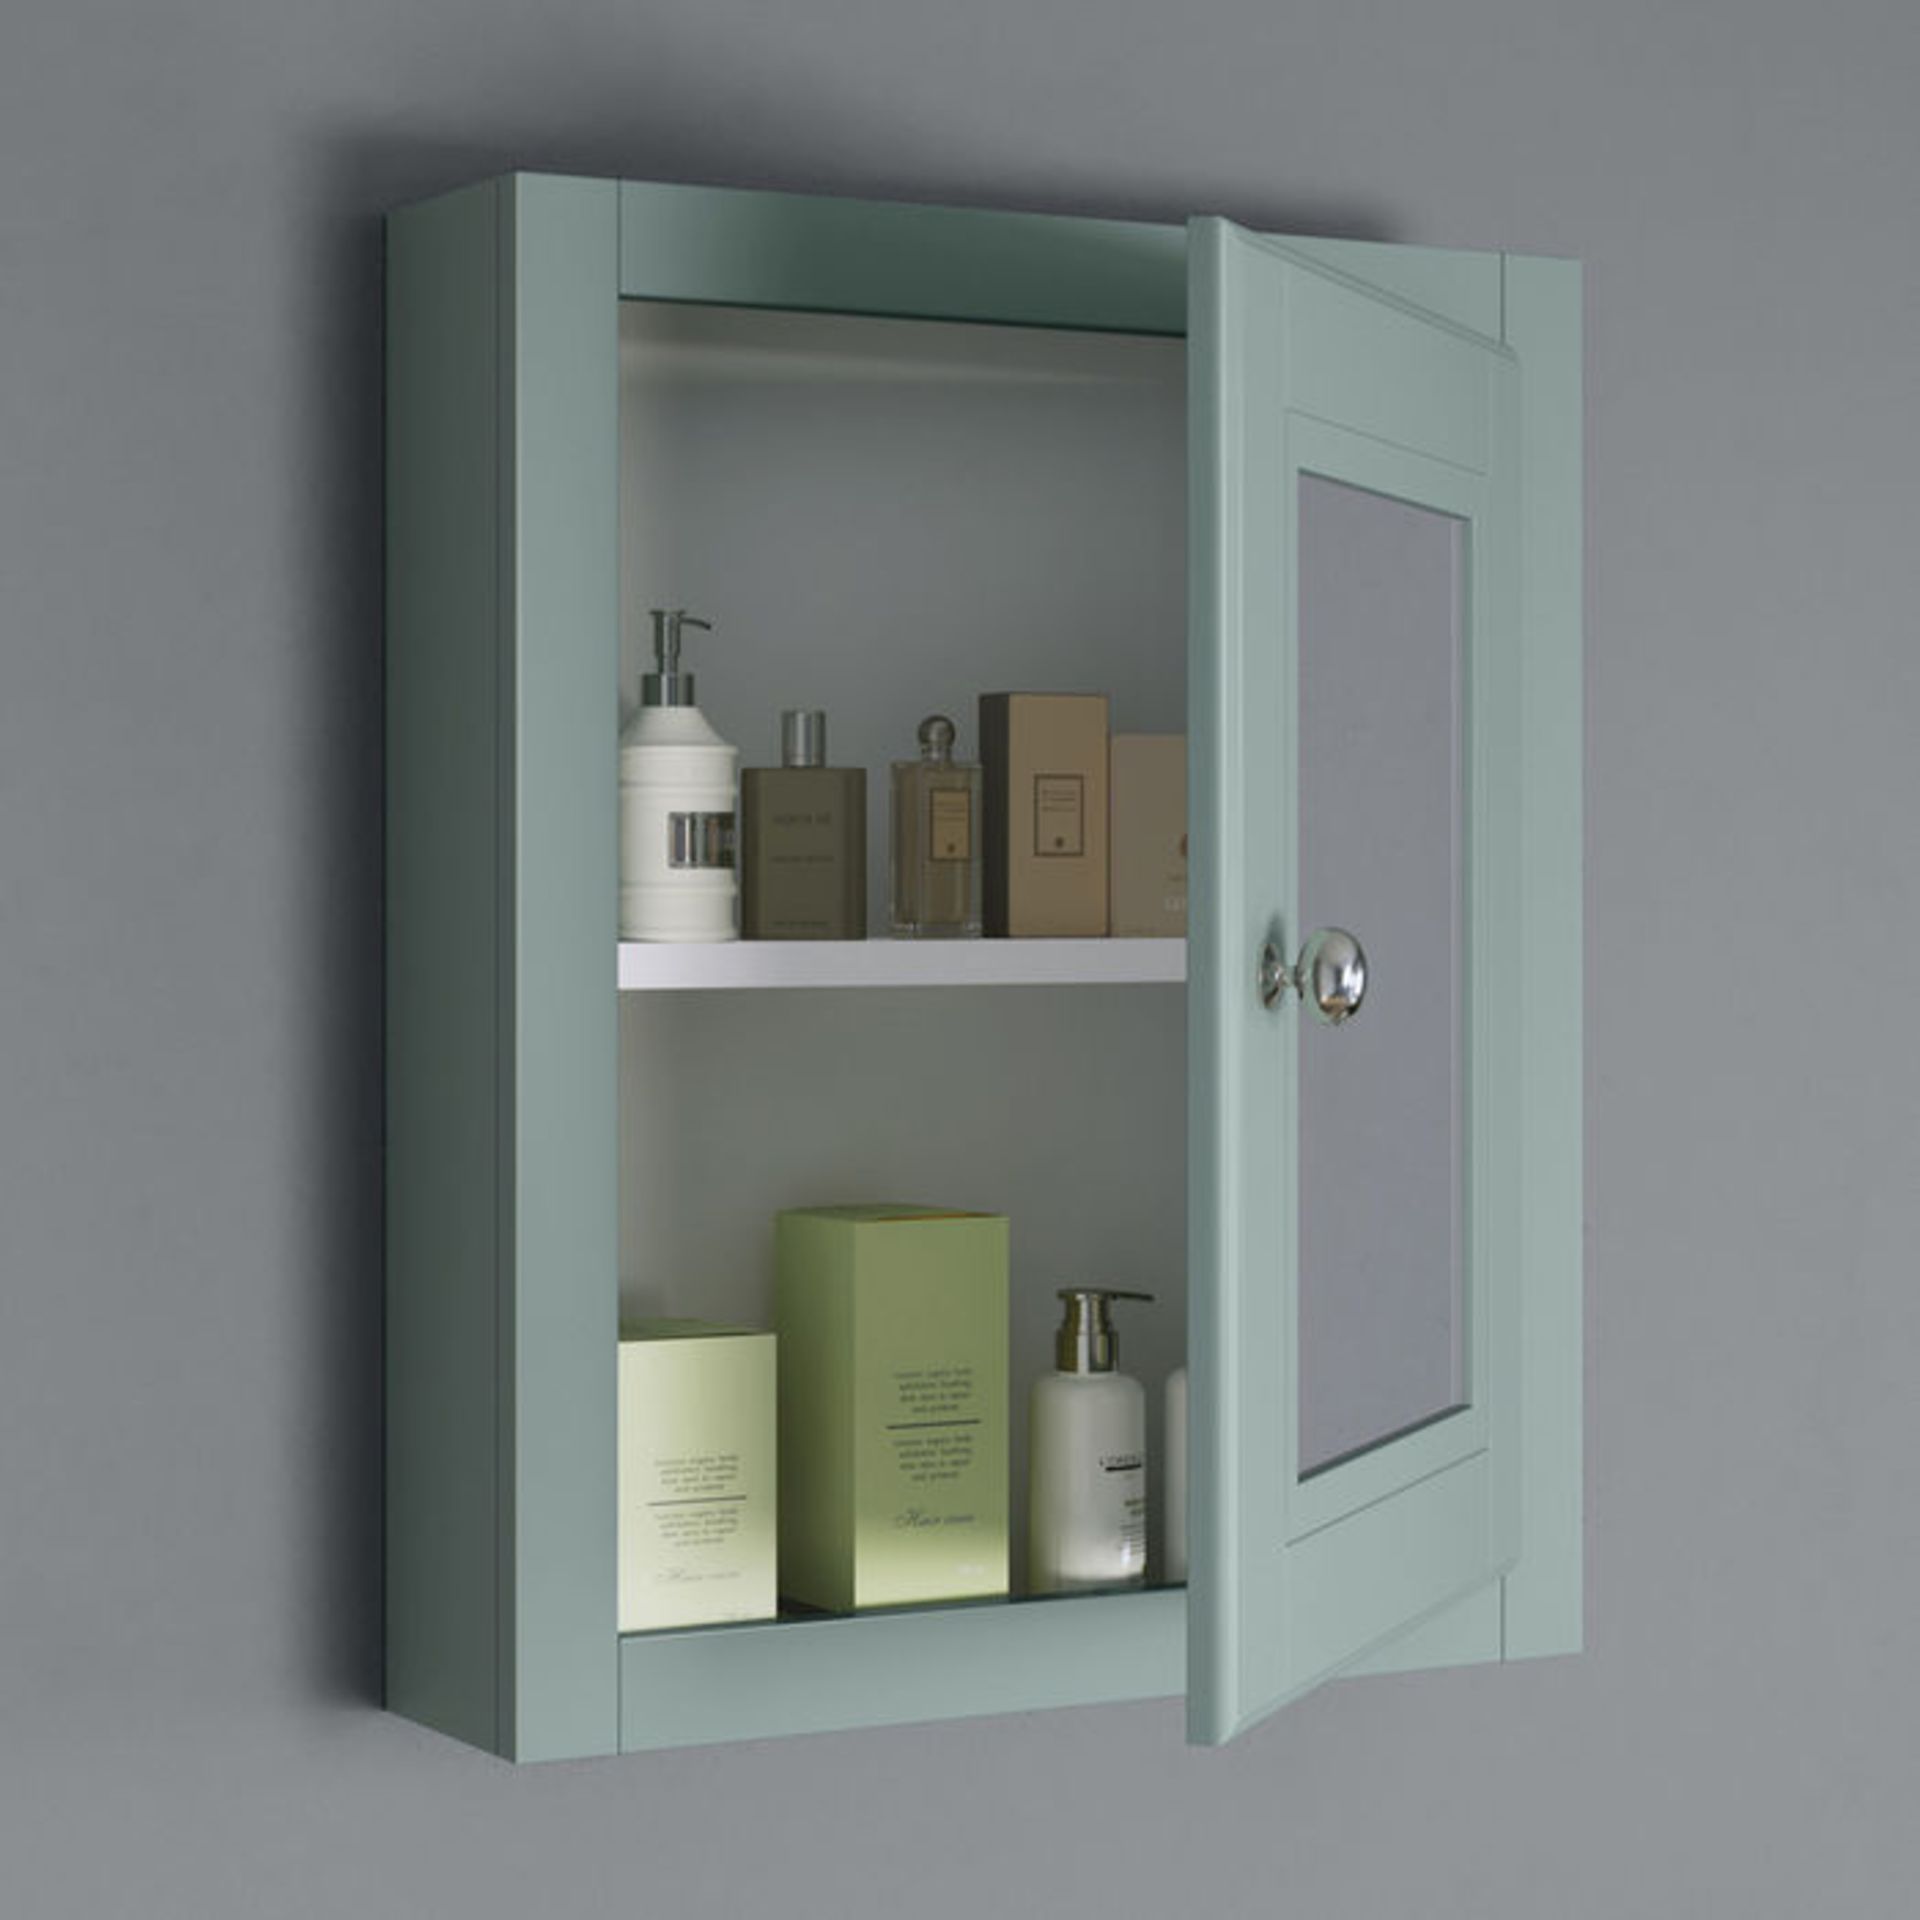 (OS55) Cambridge Single Door Mirror Cabinet - Marine Mist. RRP £199.99. Traditional aesthetic offers - Image 2 of 3